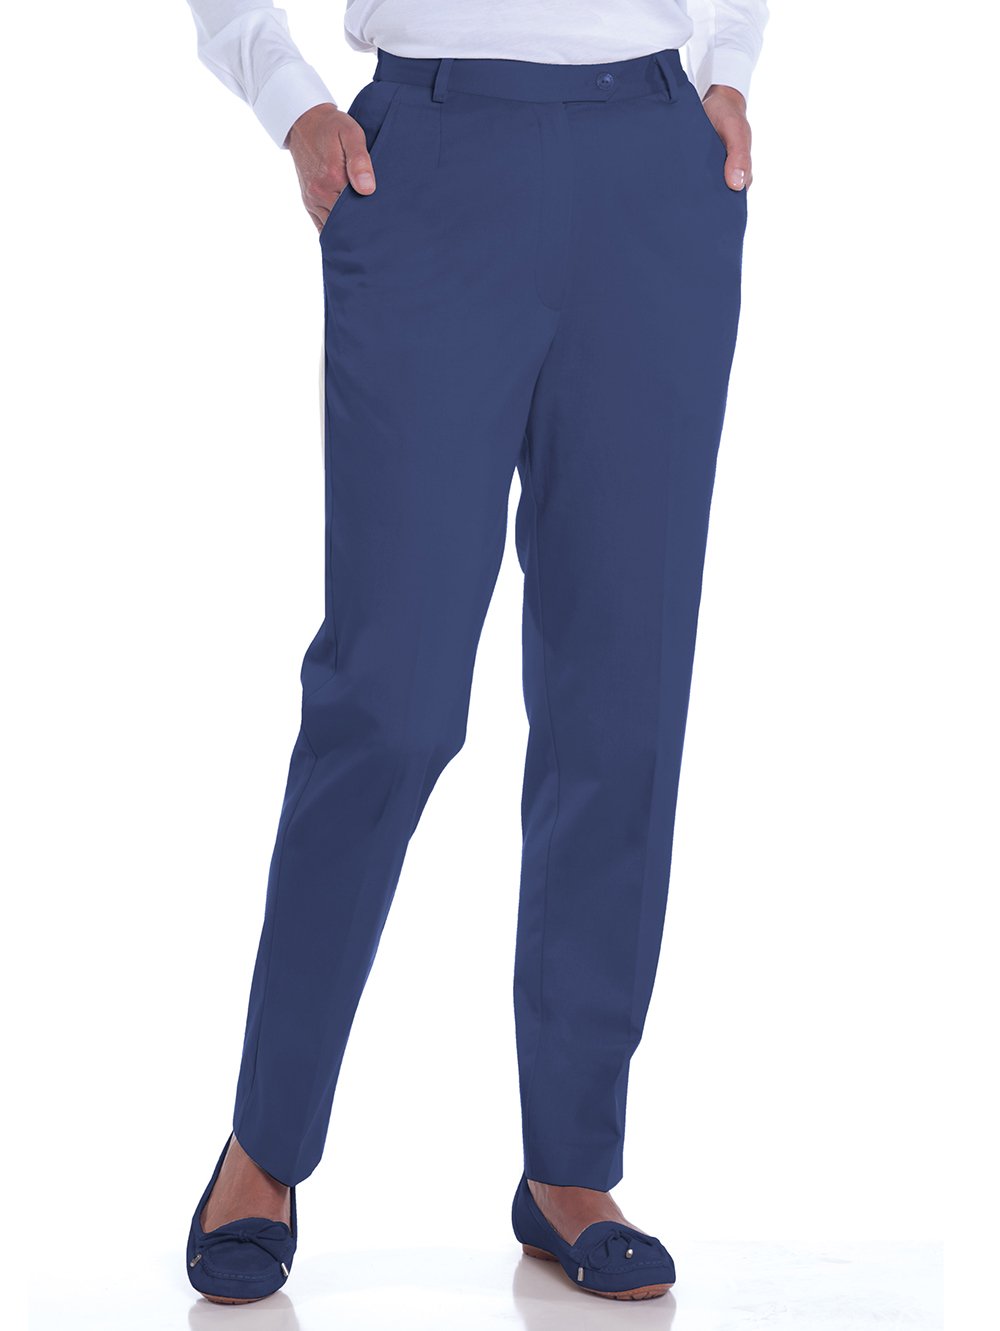 Petite Stretch Twill Flat Front Pant</br>Admiral 480 - Leonlevin